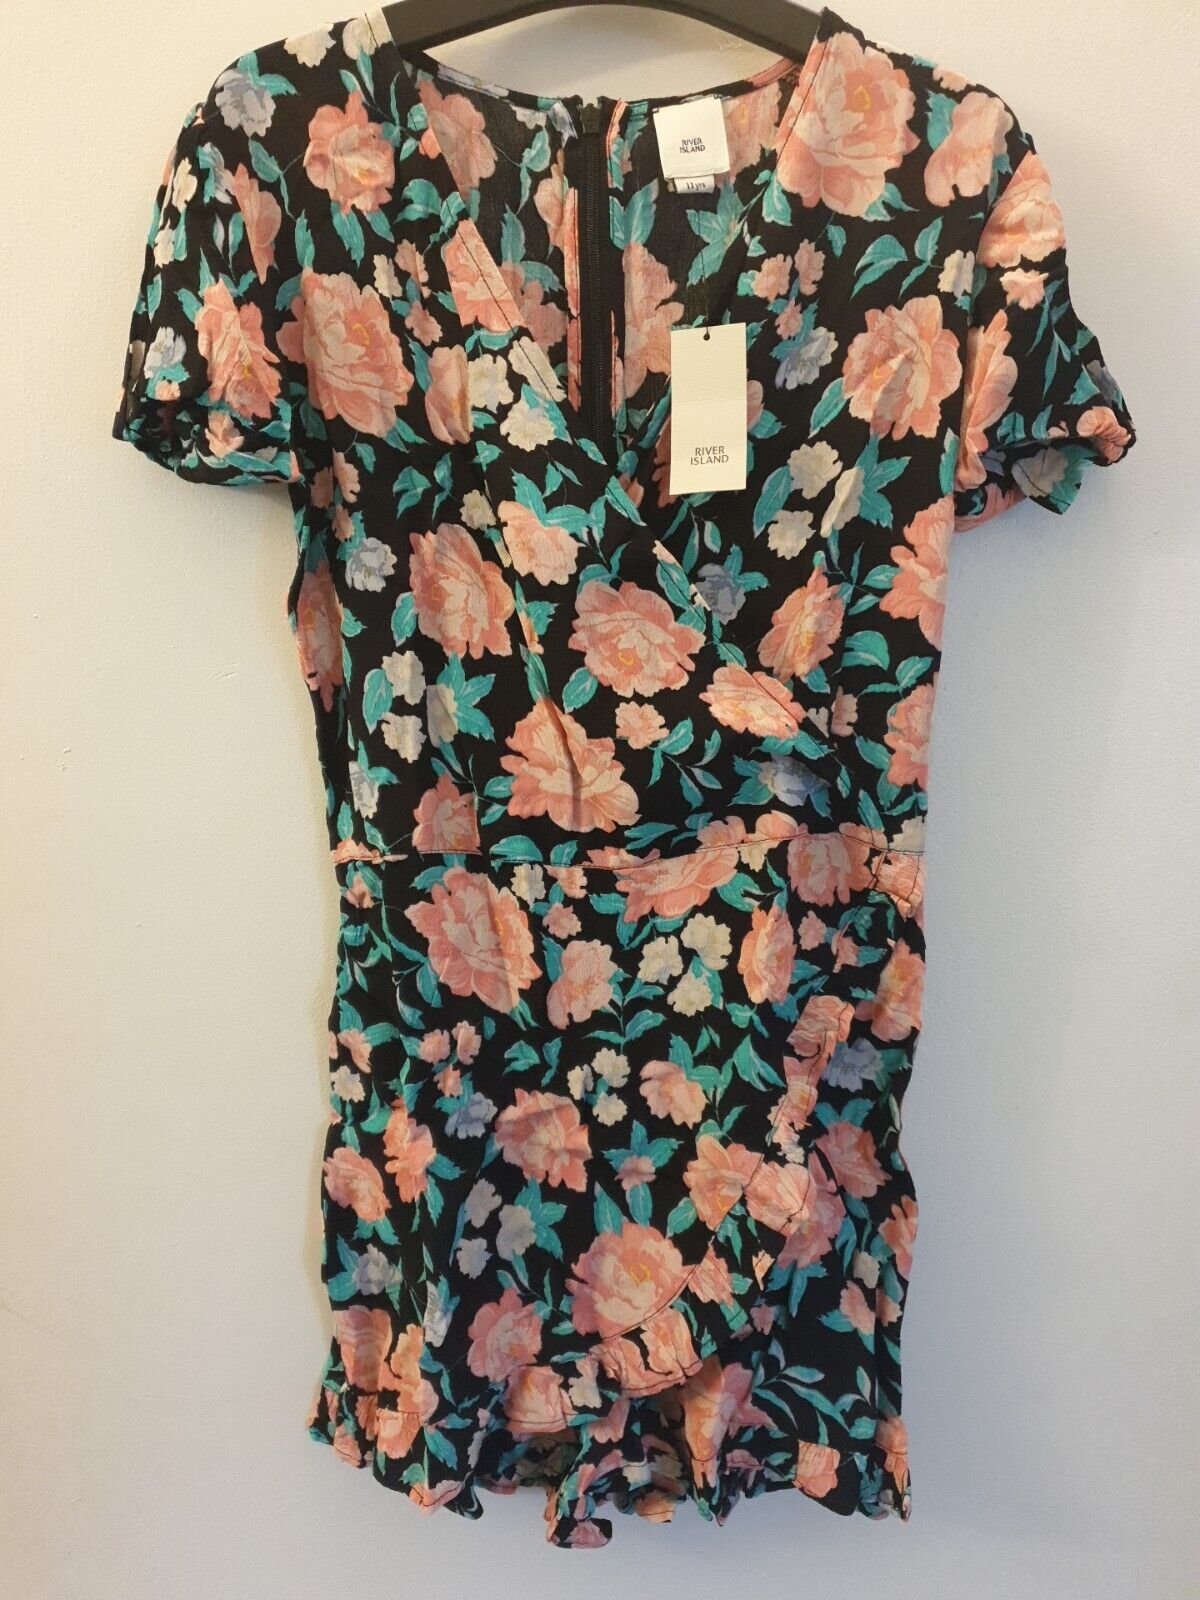 River Island Girls Floral Playsuit- Multicolored. Uk 11yrs